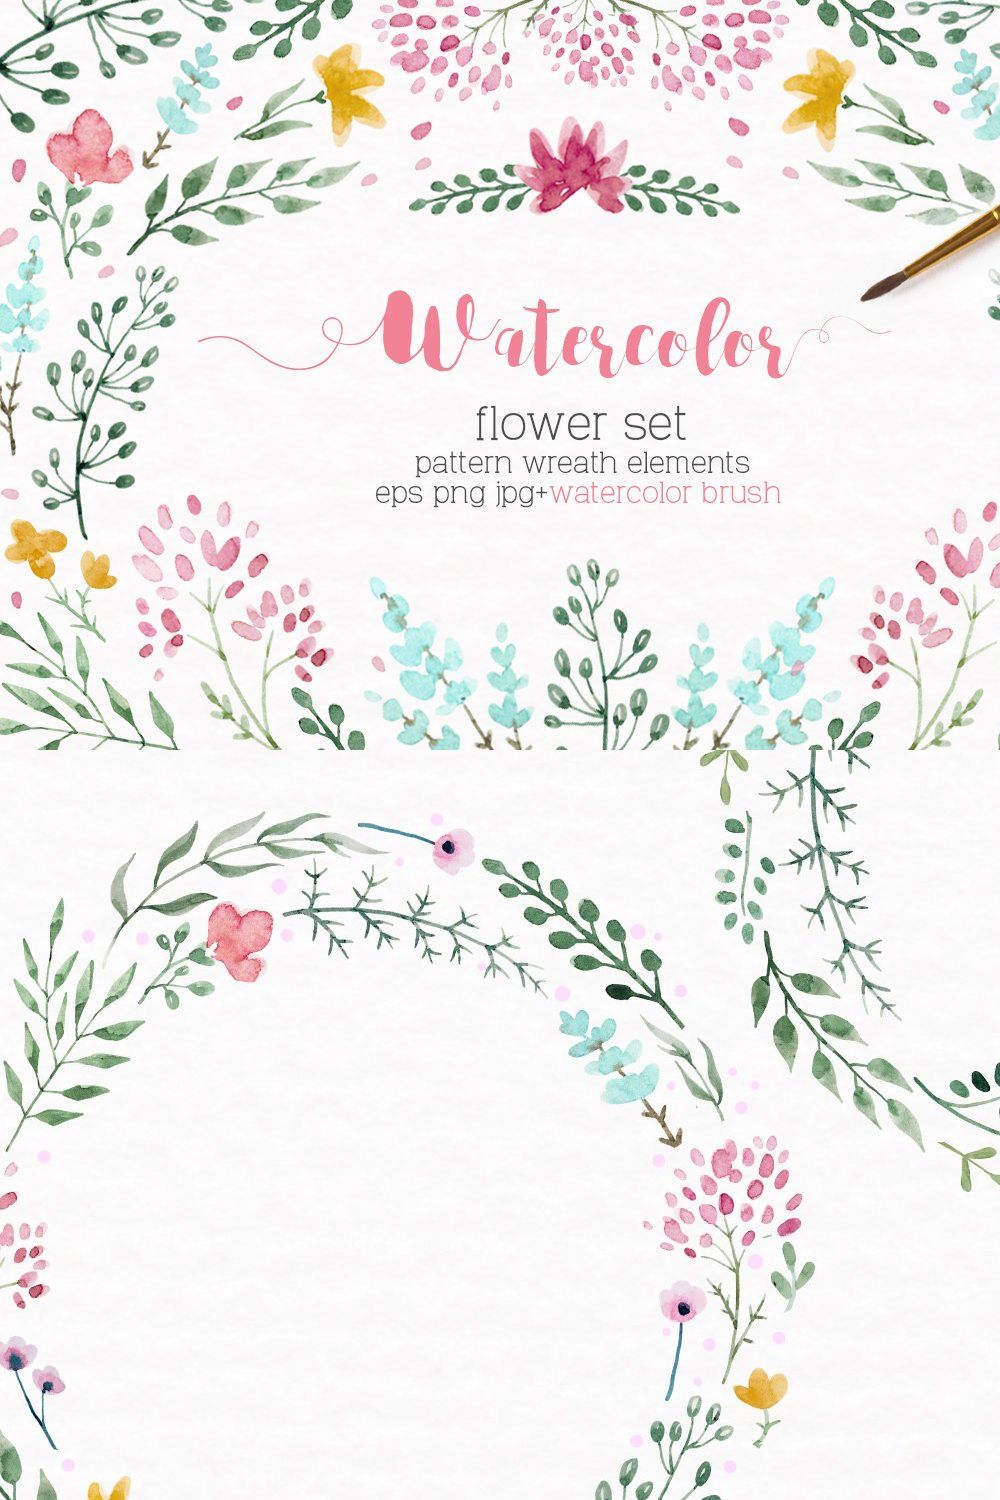 Watercolor floral set +Brushes pinterest preview image.